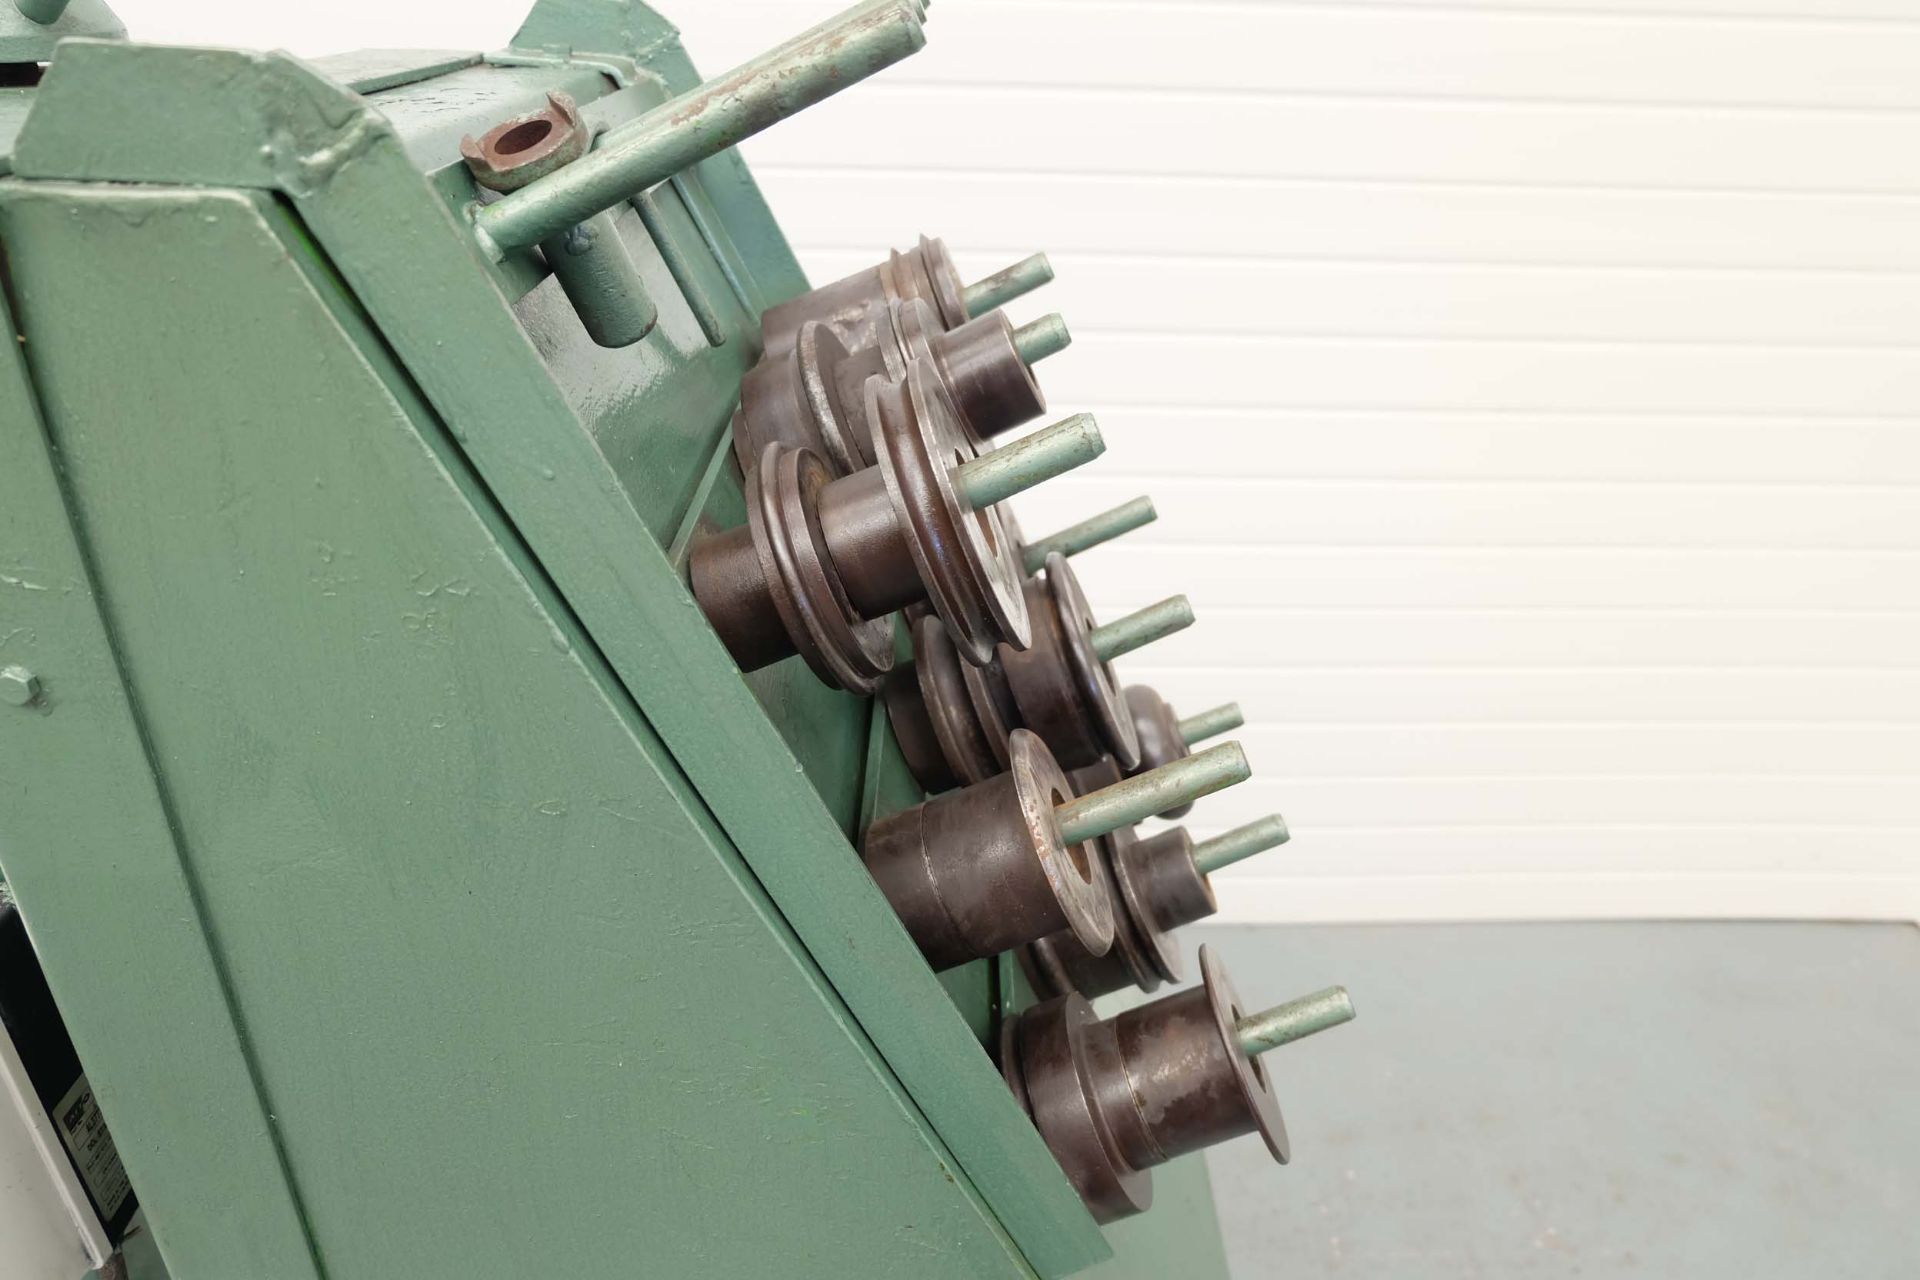 Power Swaging Machine. Throat 700mm. Spindle Size: 32mm Diameter. With Tooling & Foot Control. - Image 8 of 9